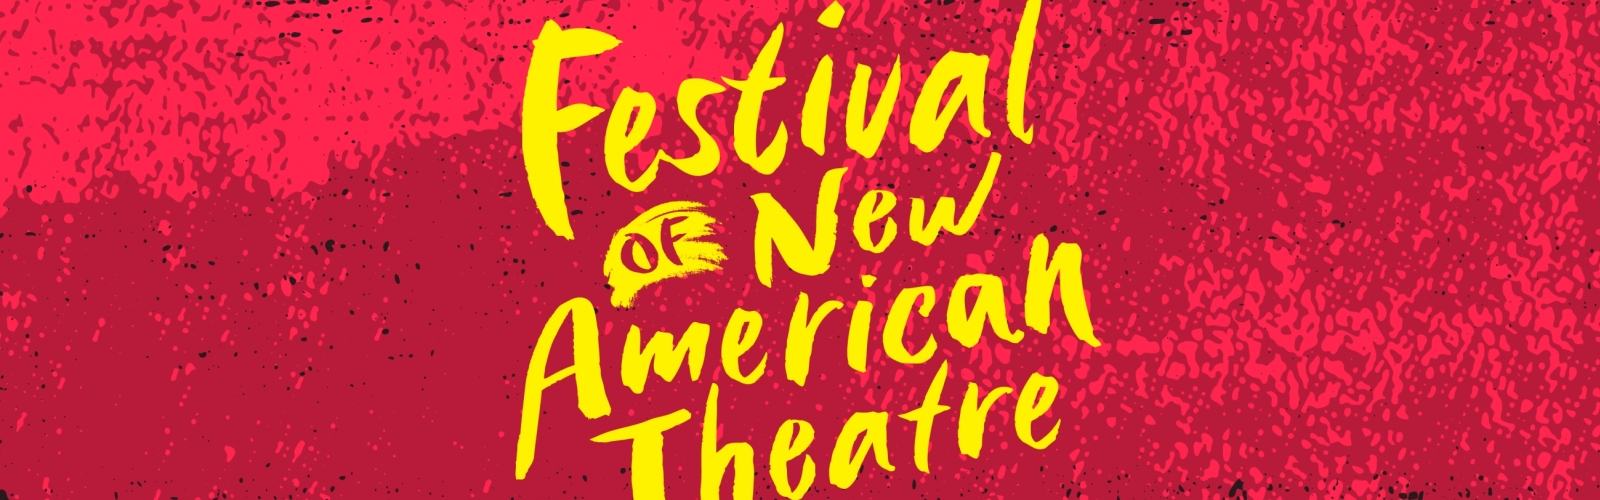 Festival of New American Theatre logo in yellow font with a red background